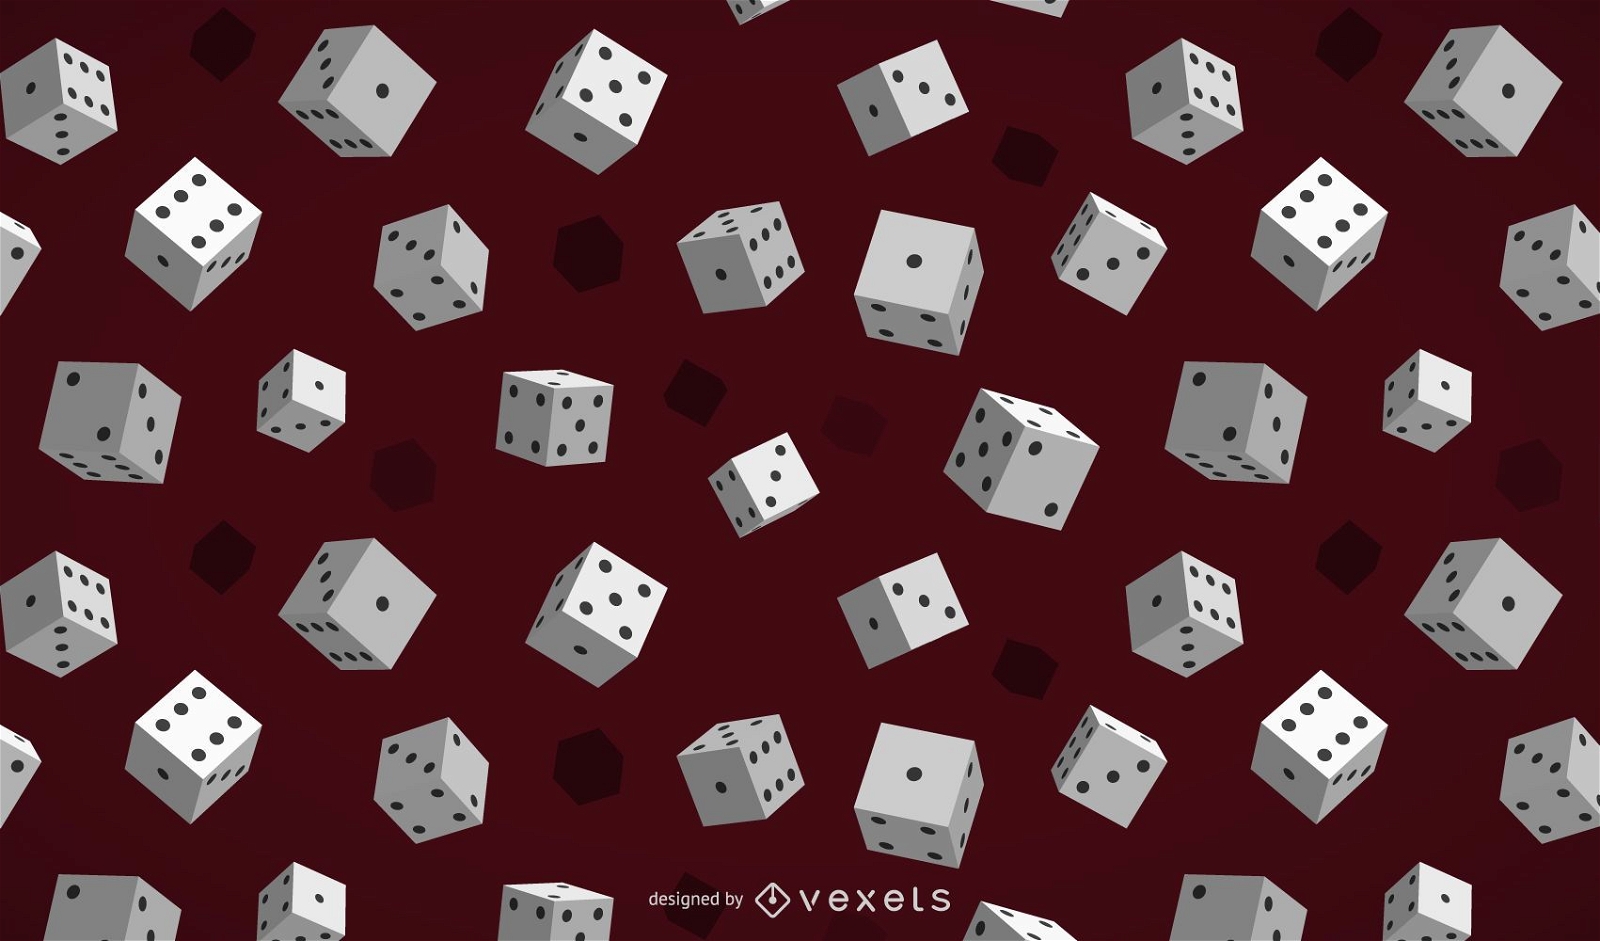 Glossy 3D Gambling Dices Background